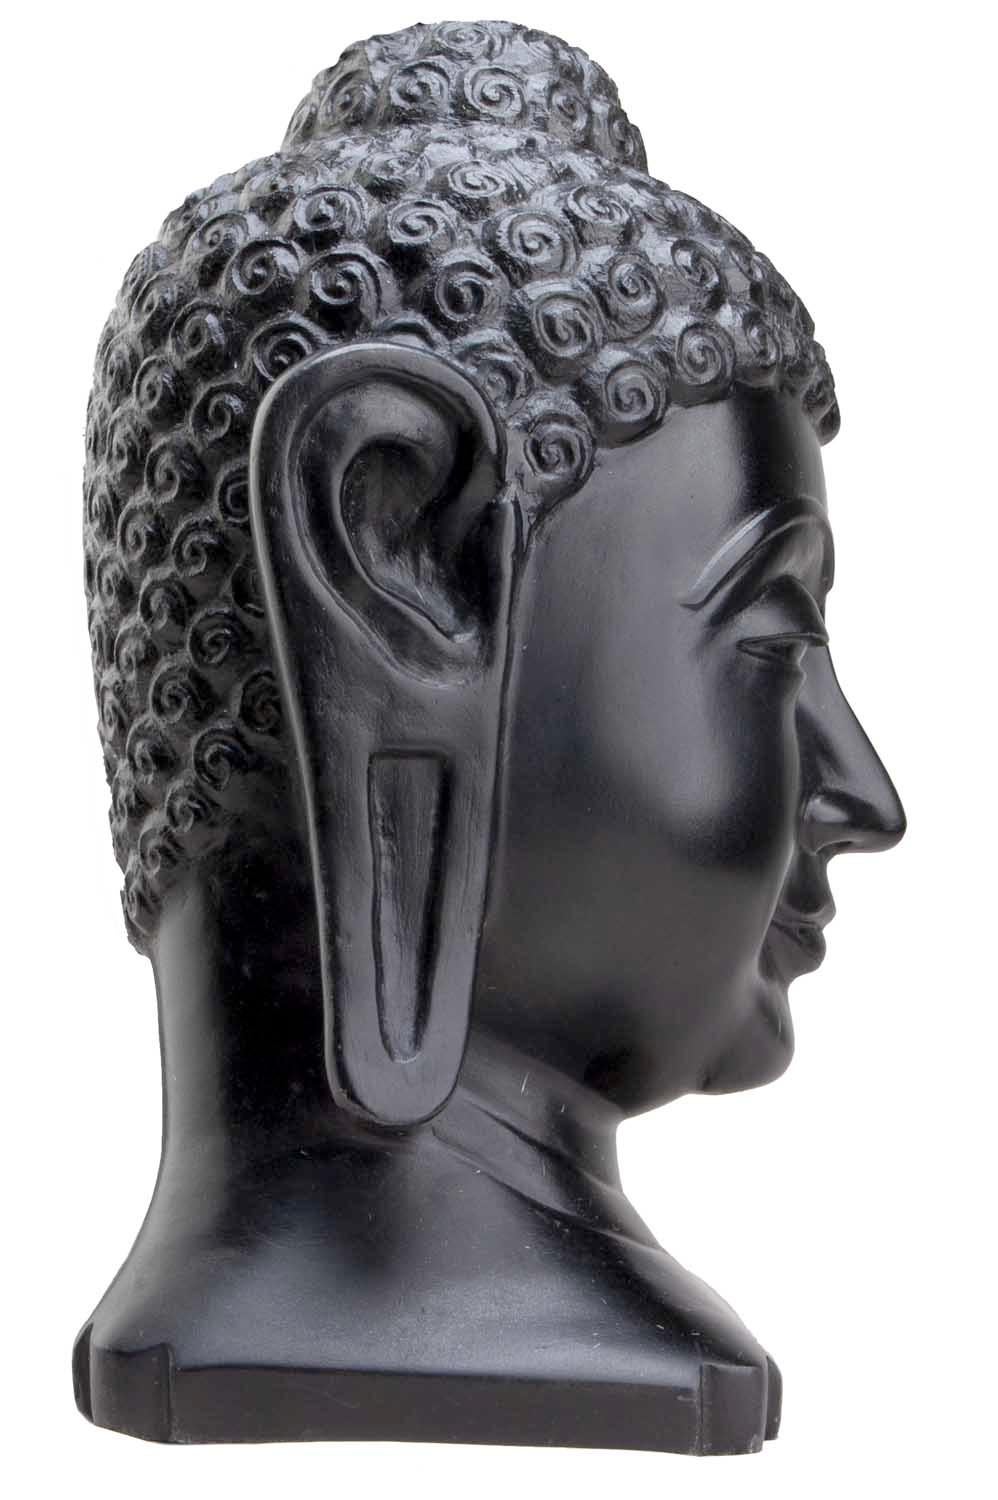 This Luminous Buddha Head hand carved by the great grandsons of the creators of the Taj Mahal.
Makrana marble is the most dense marble on the planet. Evenly stained and highly polished in black with features of perfect symmetrics; pin curl hair,